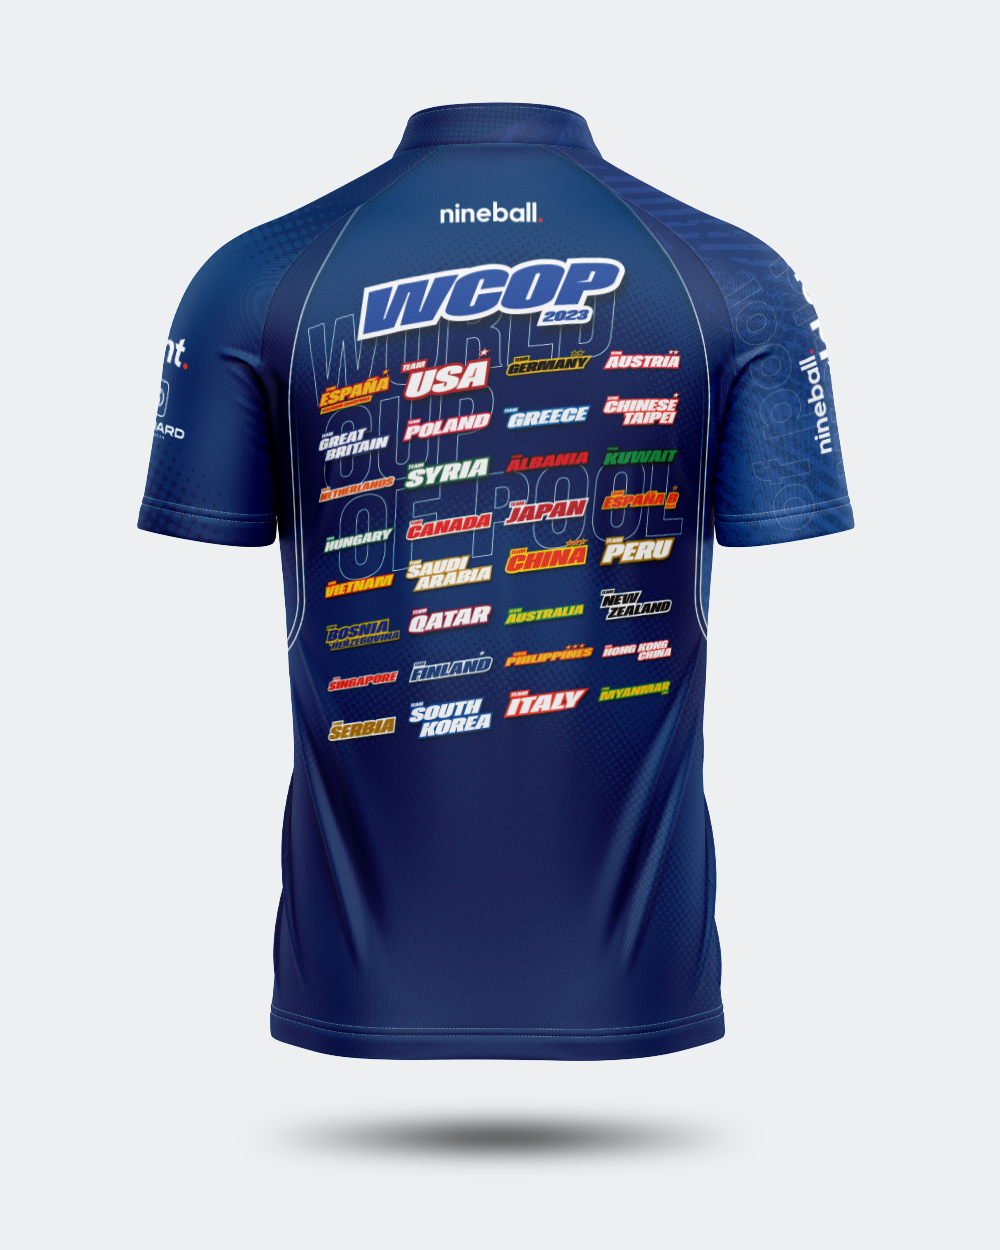 2023 WCOP Event Jersey